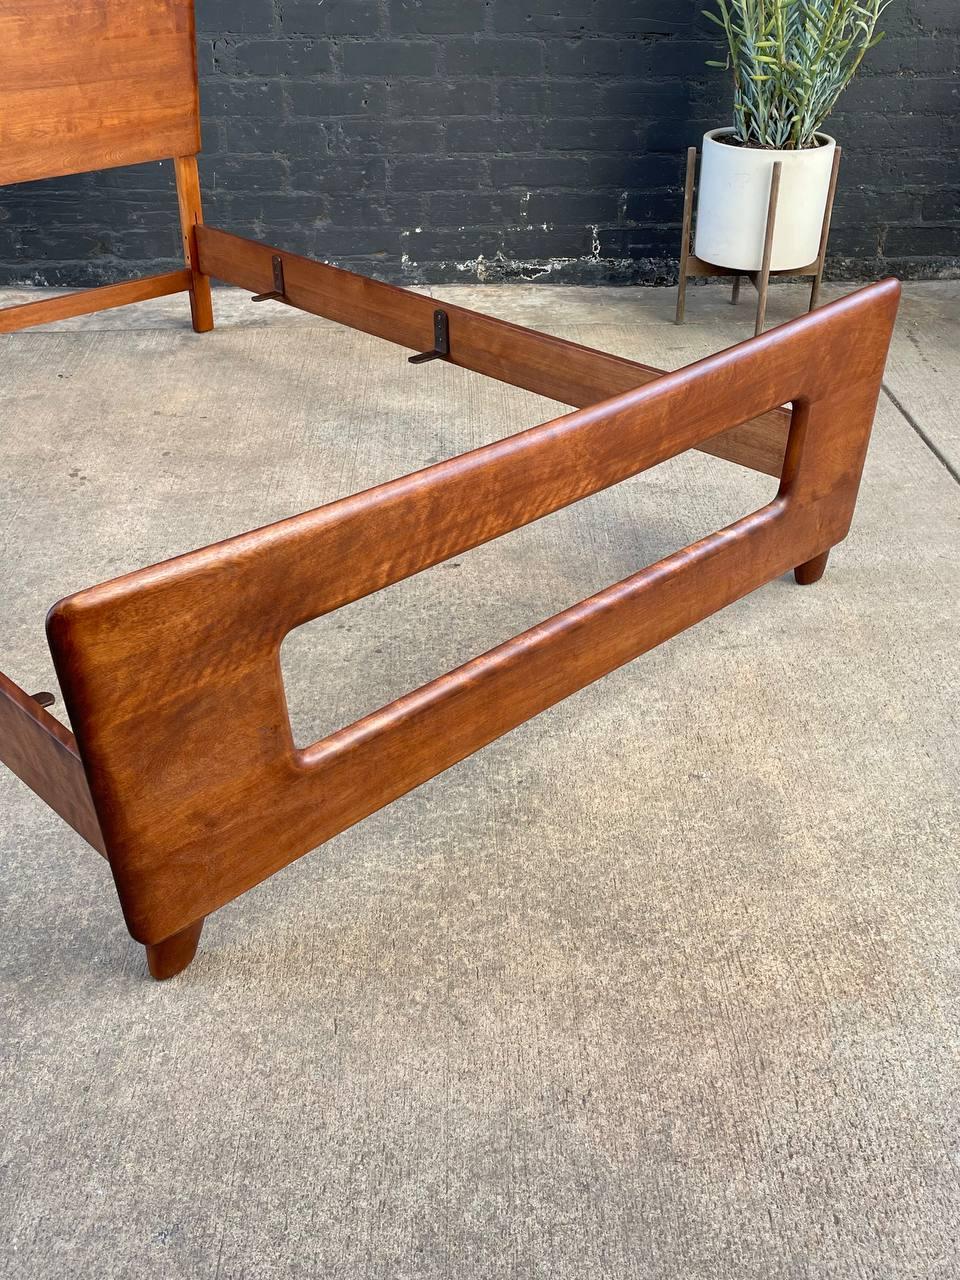 Newly Refinished - Mid-Century Modern Full-Size Bed “Dogbone” Frame 1